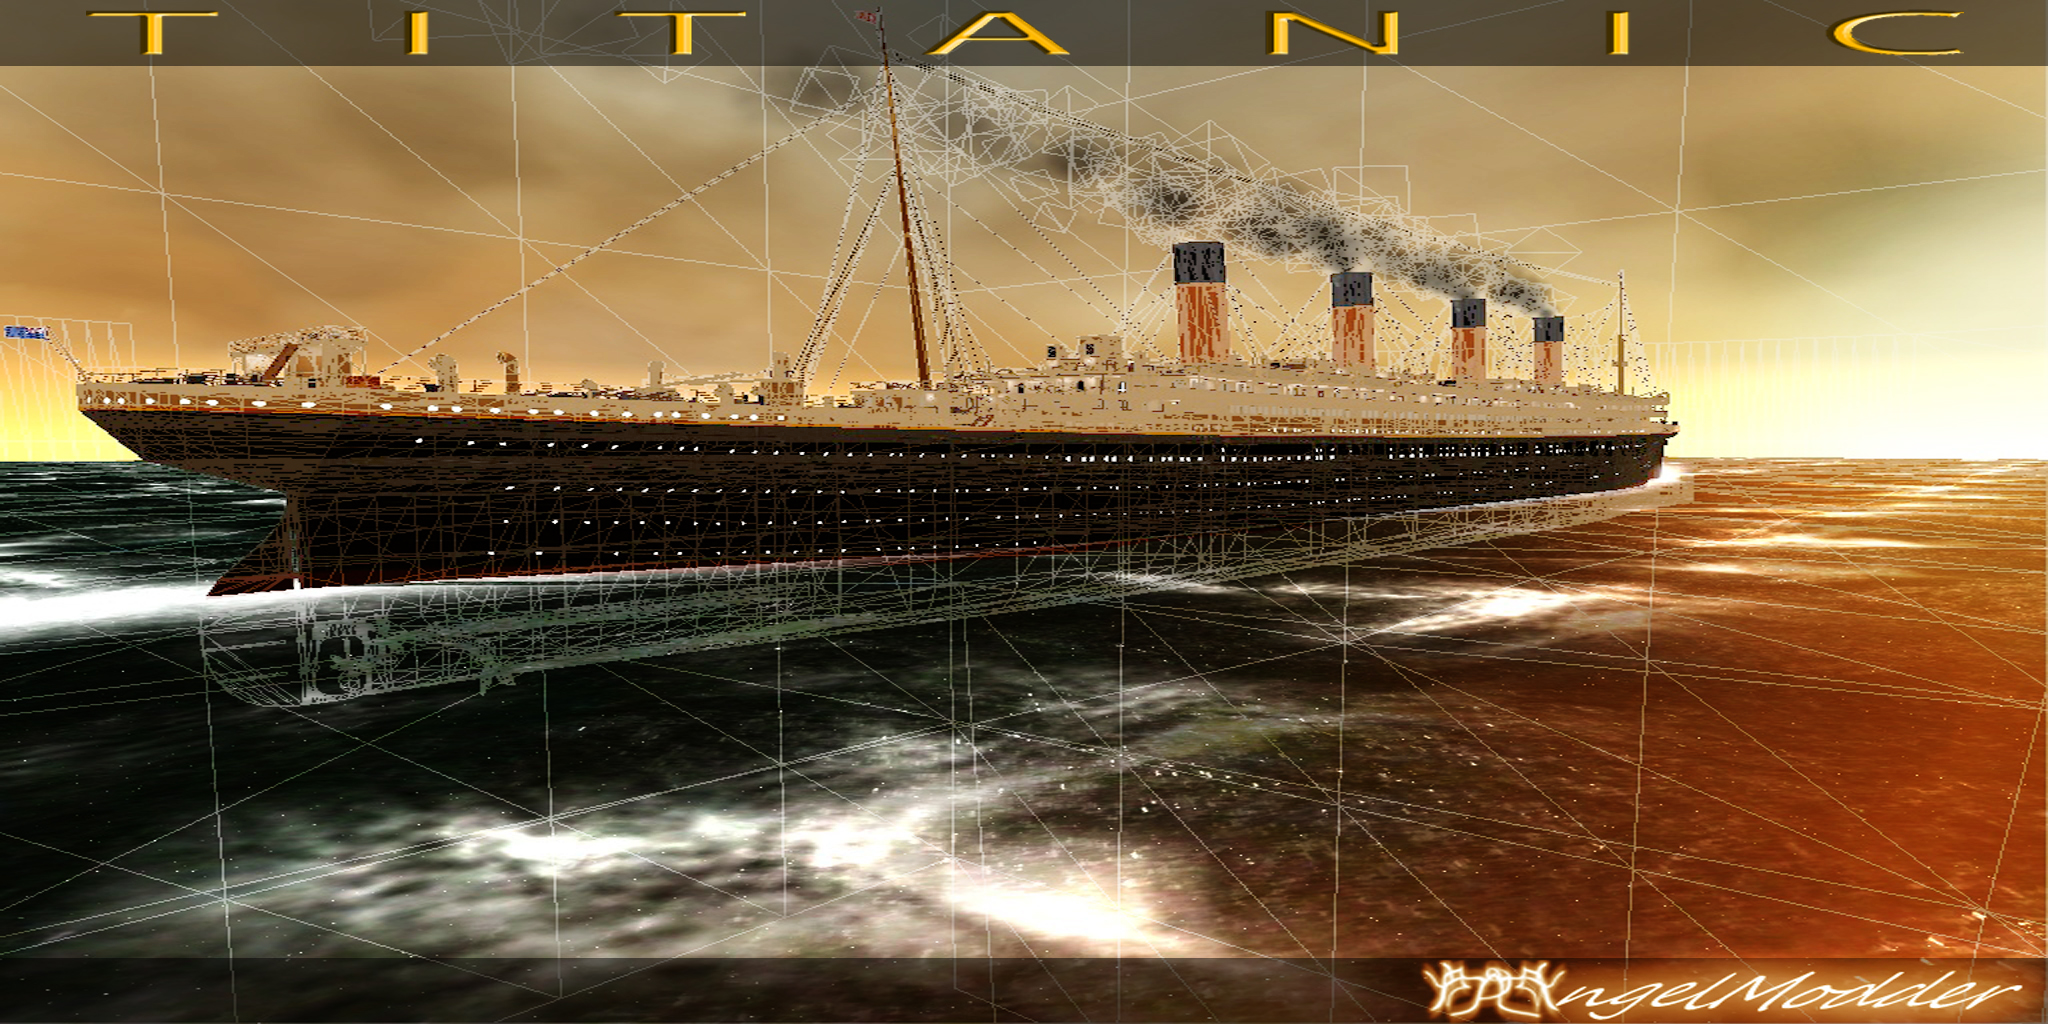 More information about "RMS Titanic BETA"